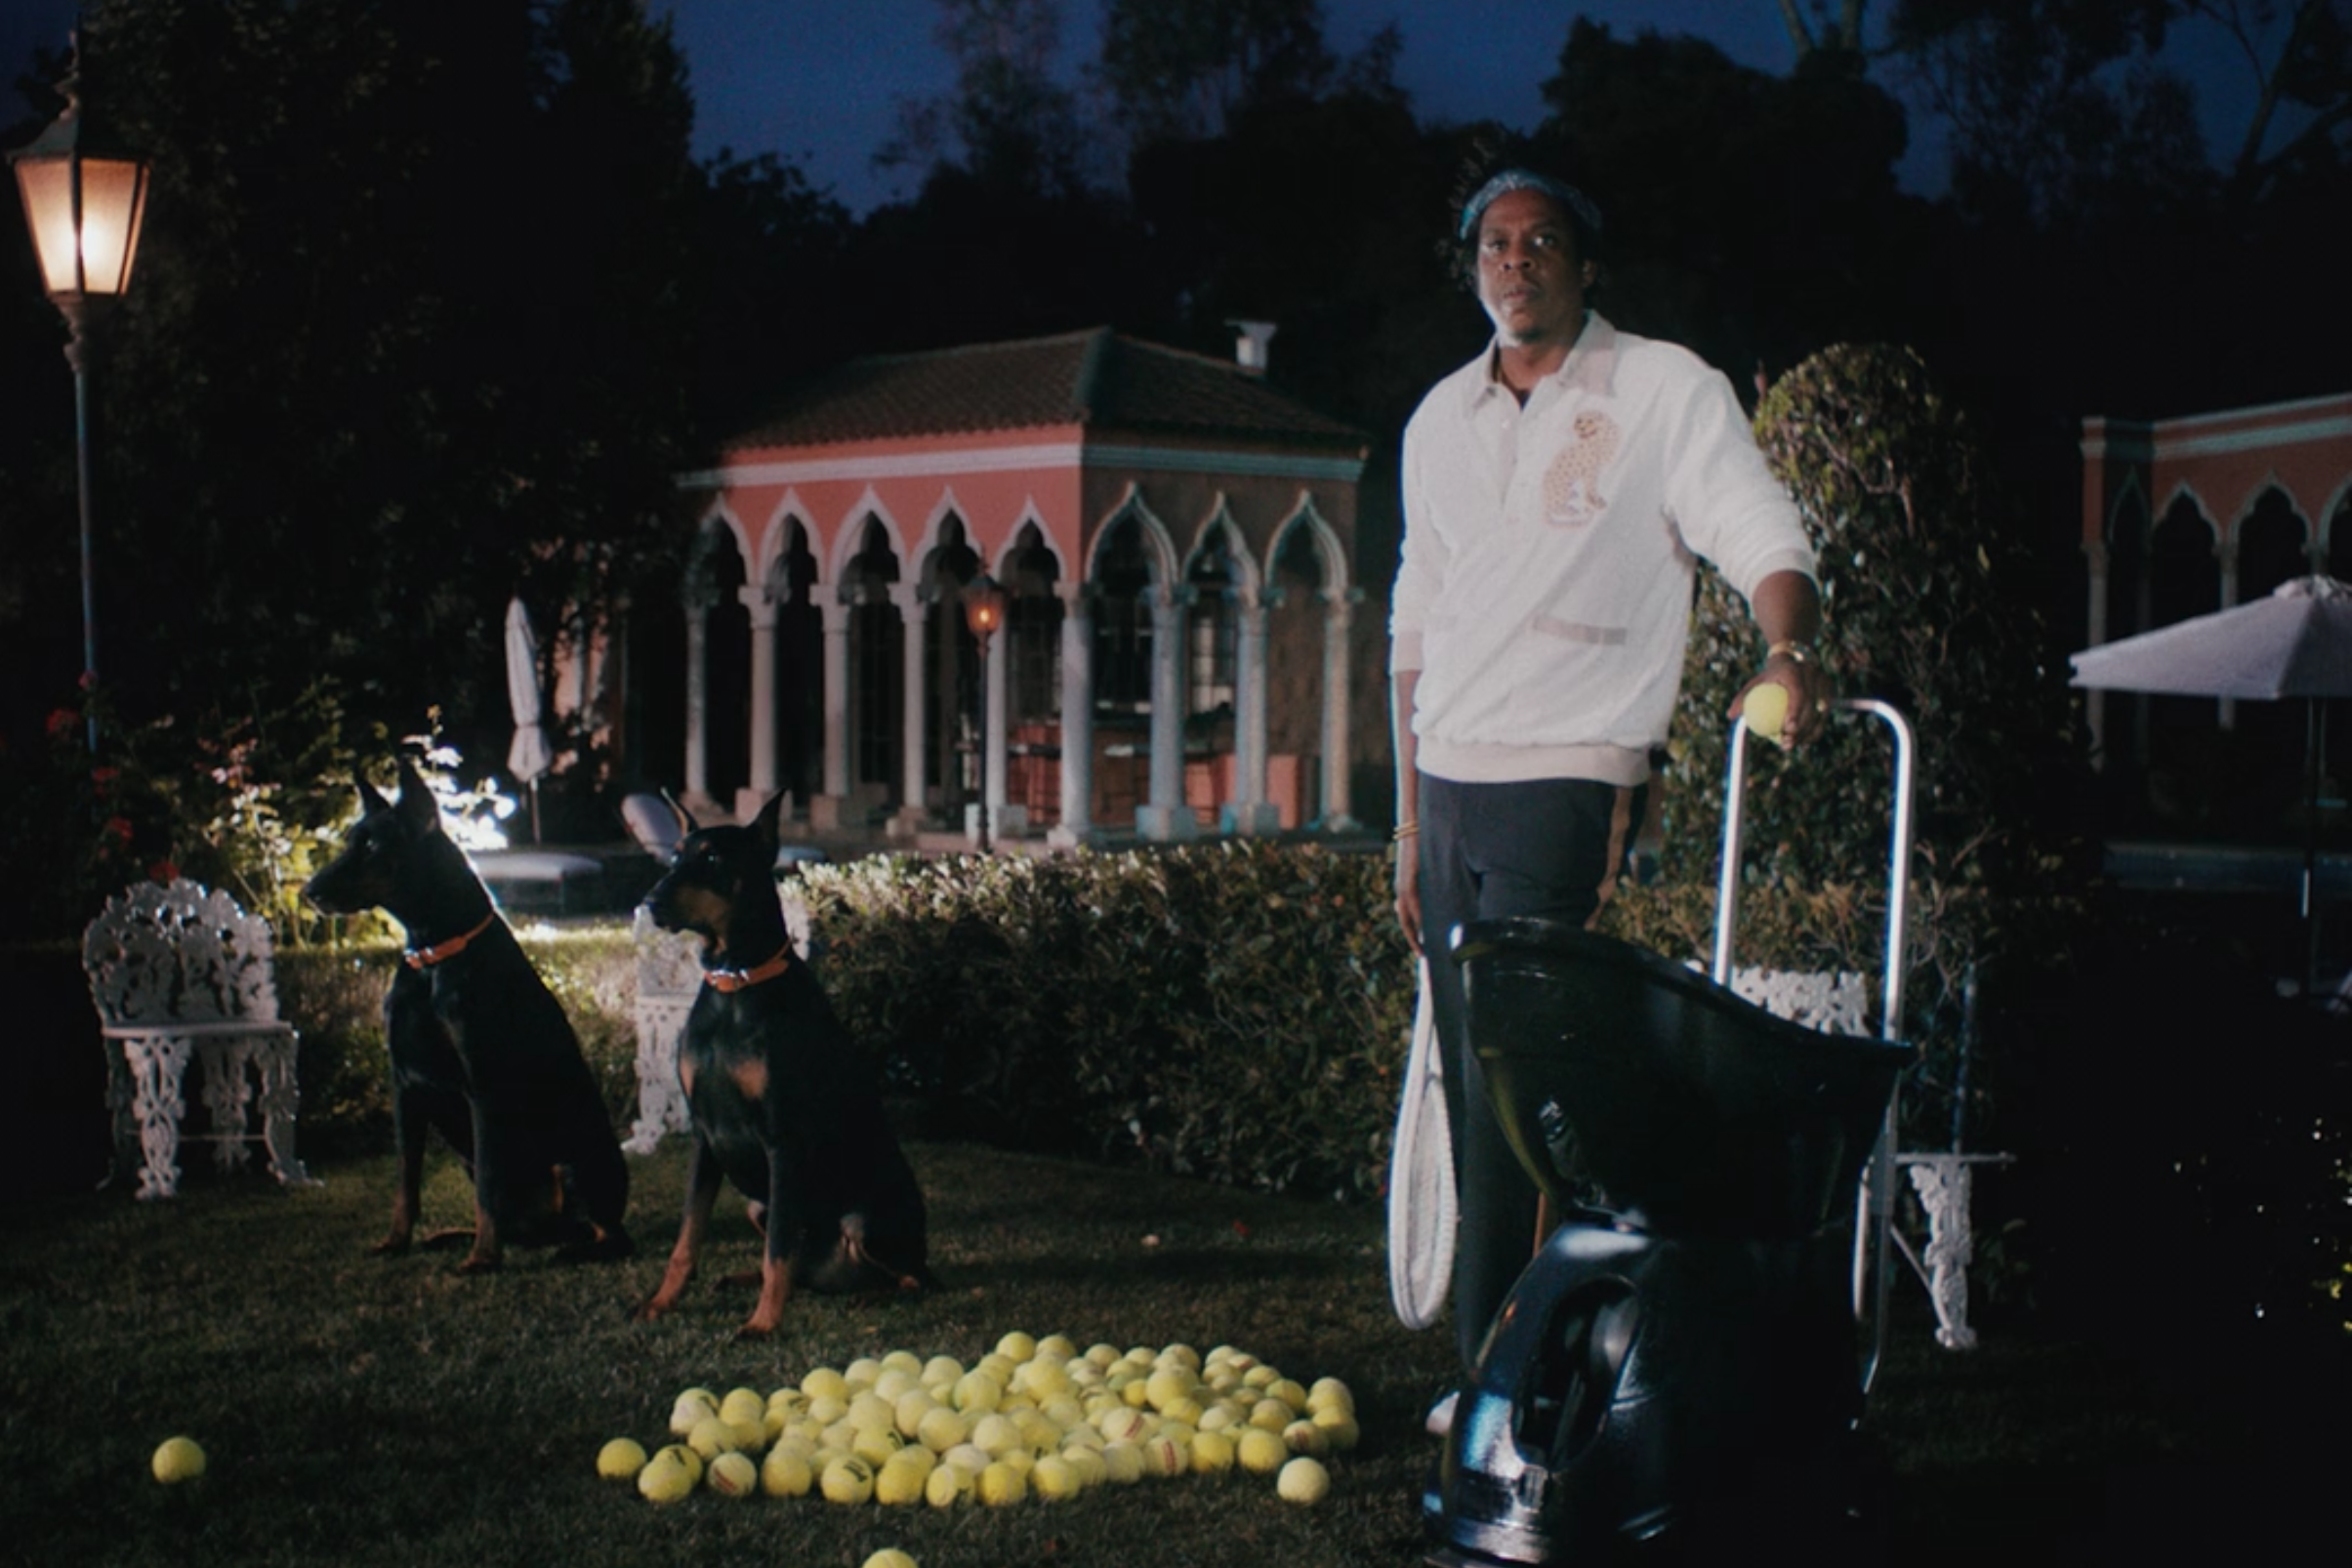 Jay-Z, in tennis gear and holding a racket, stands next to a mound of tennis balls, two dogs, and a ball machine.